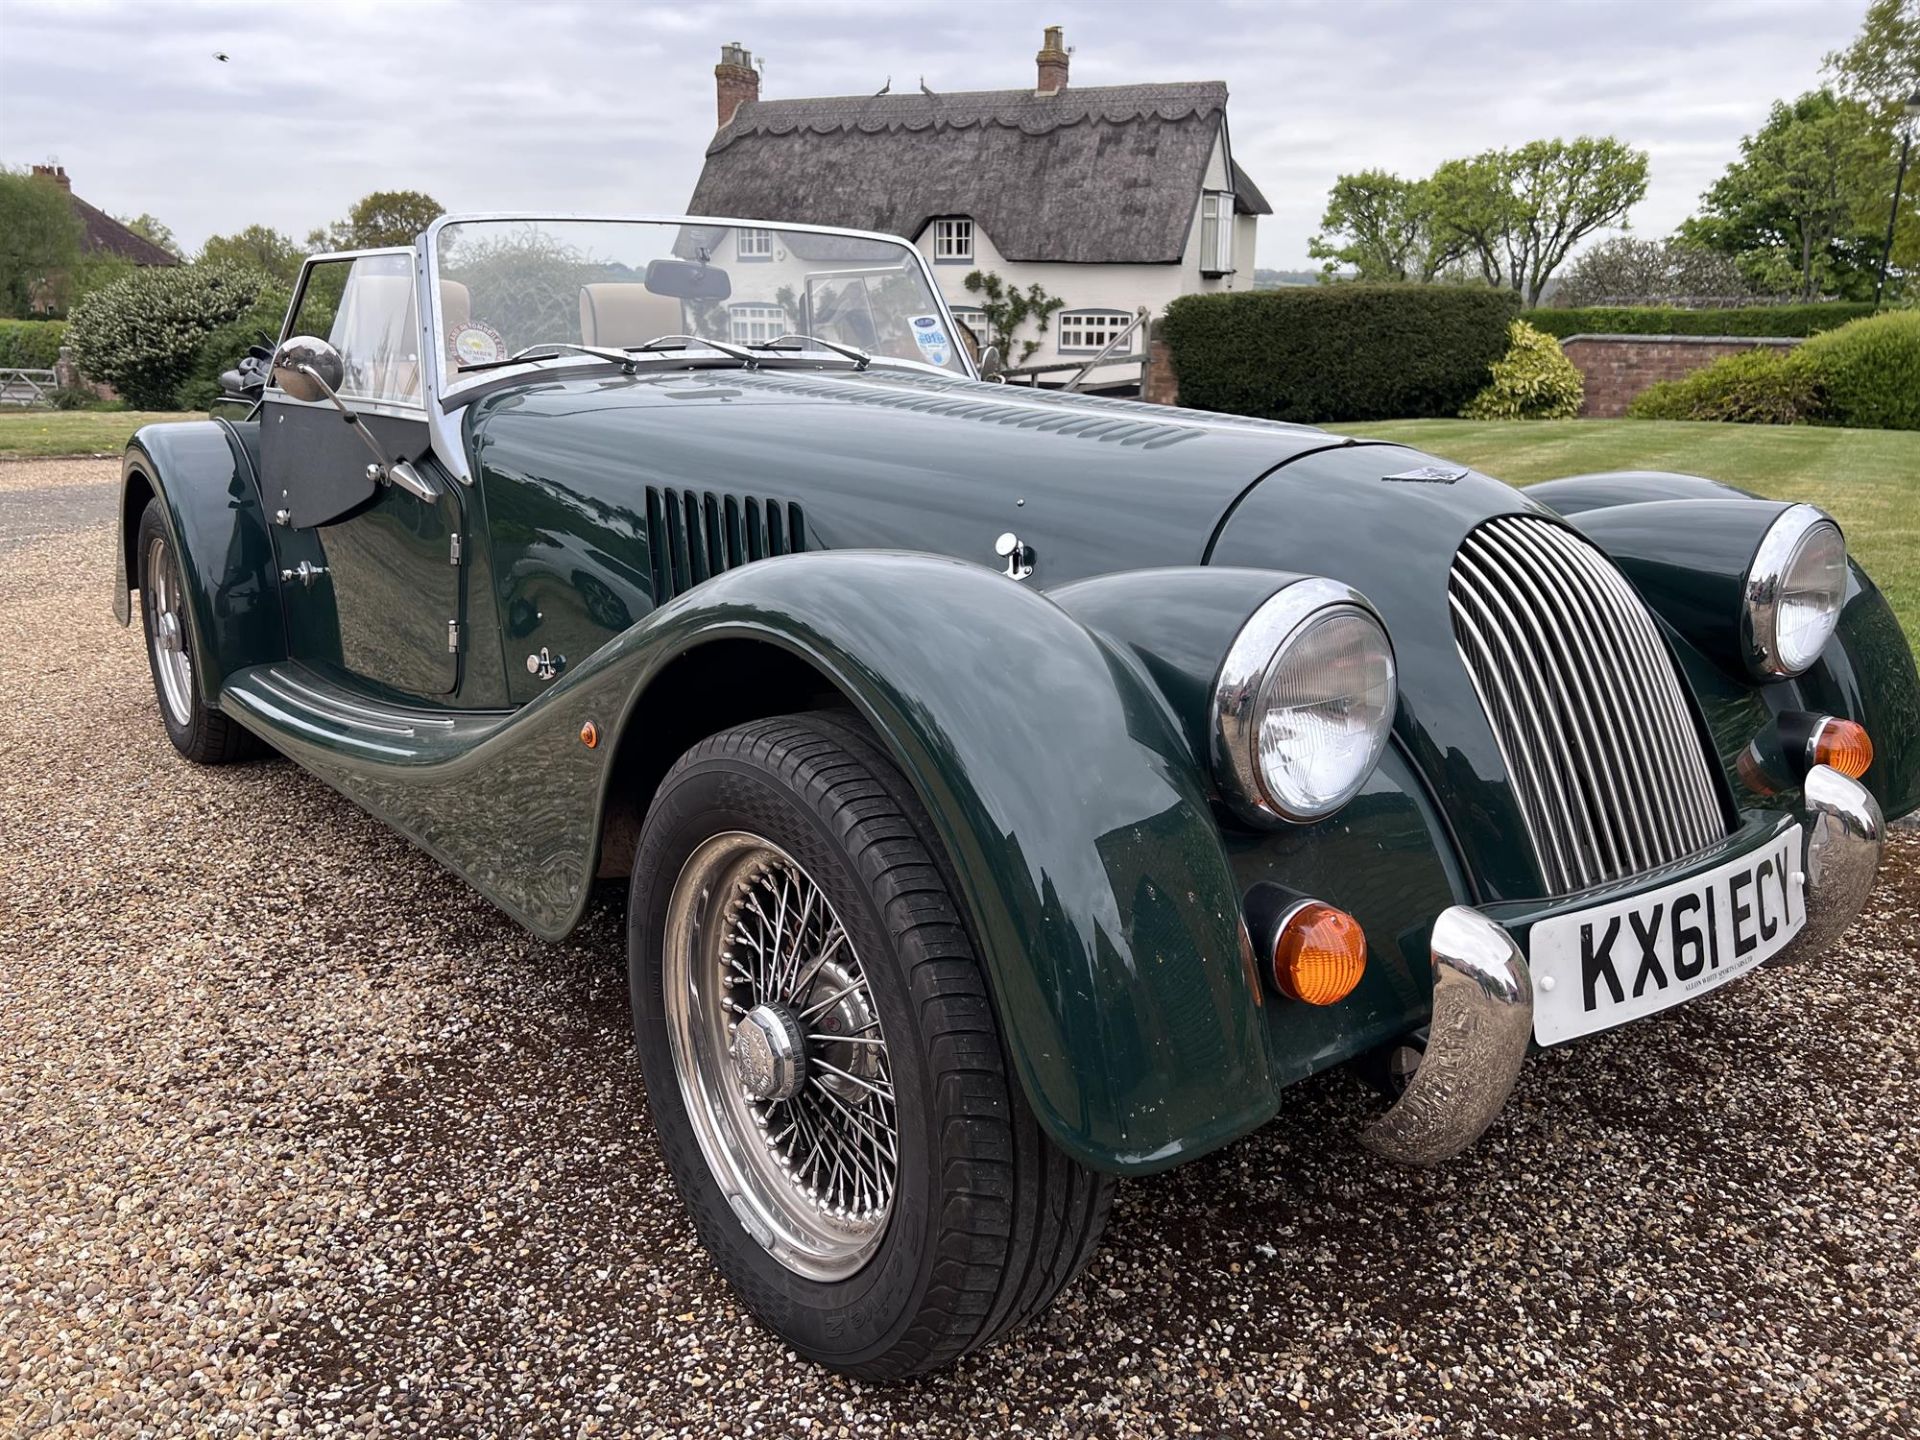 2012 Morgan Plus 4 Two Seater - Image 2 of 10